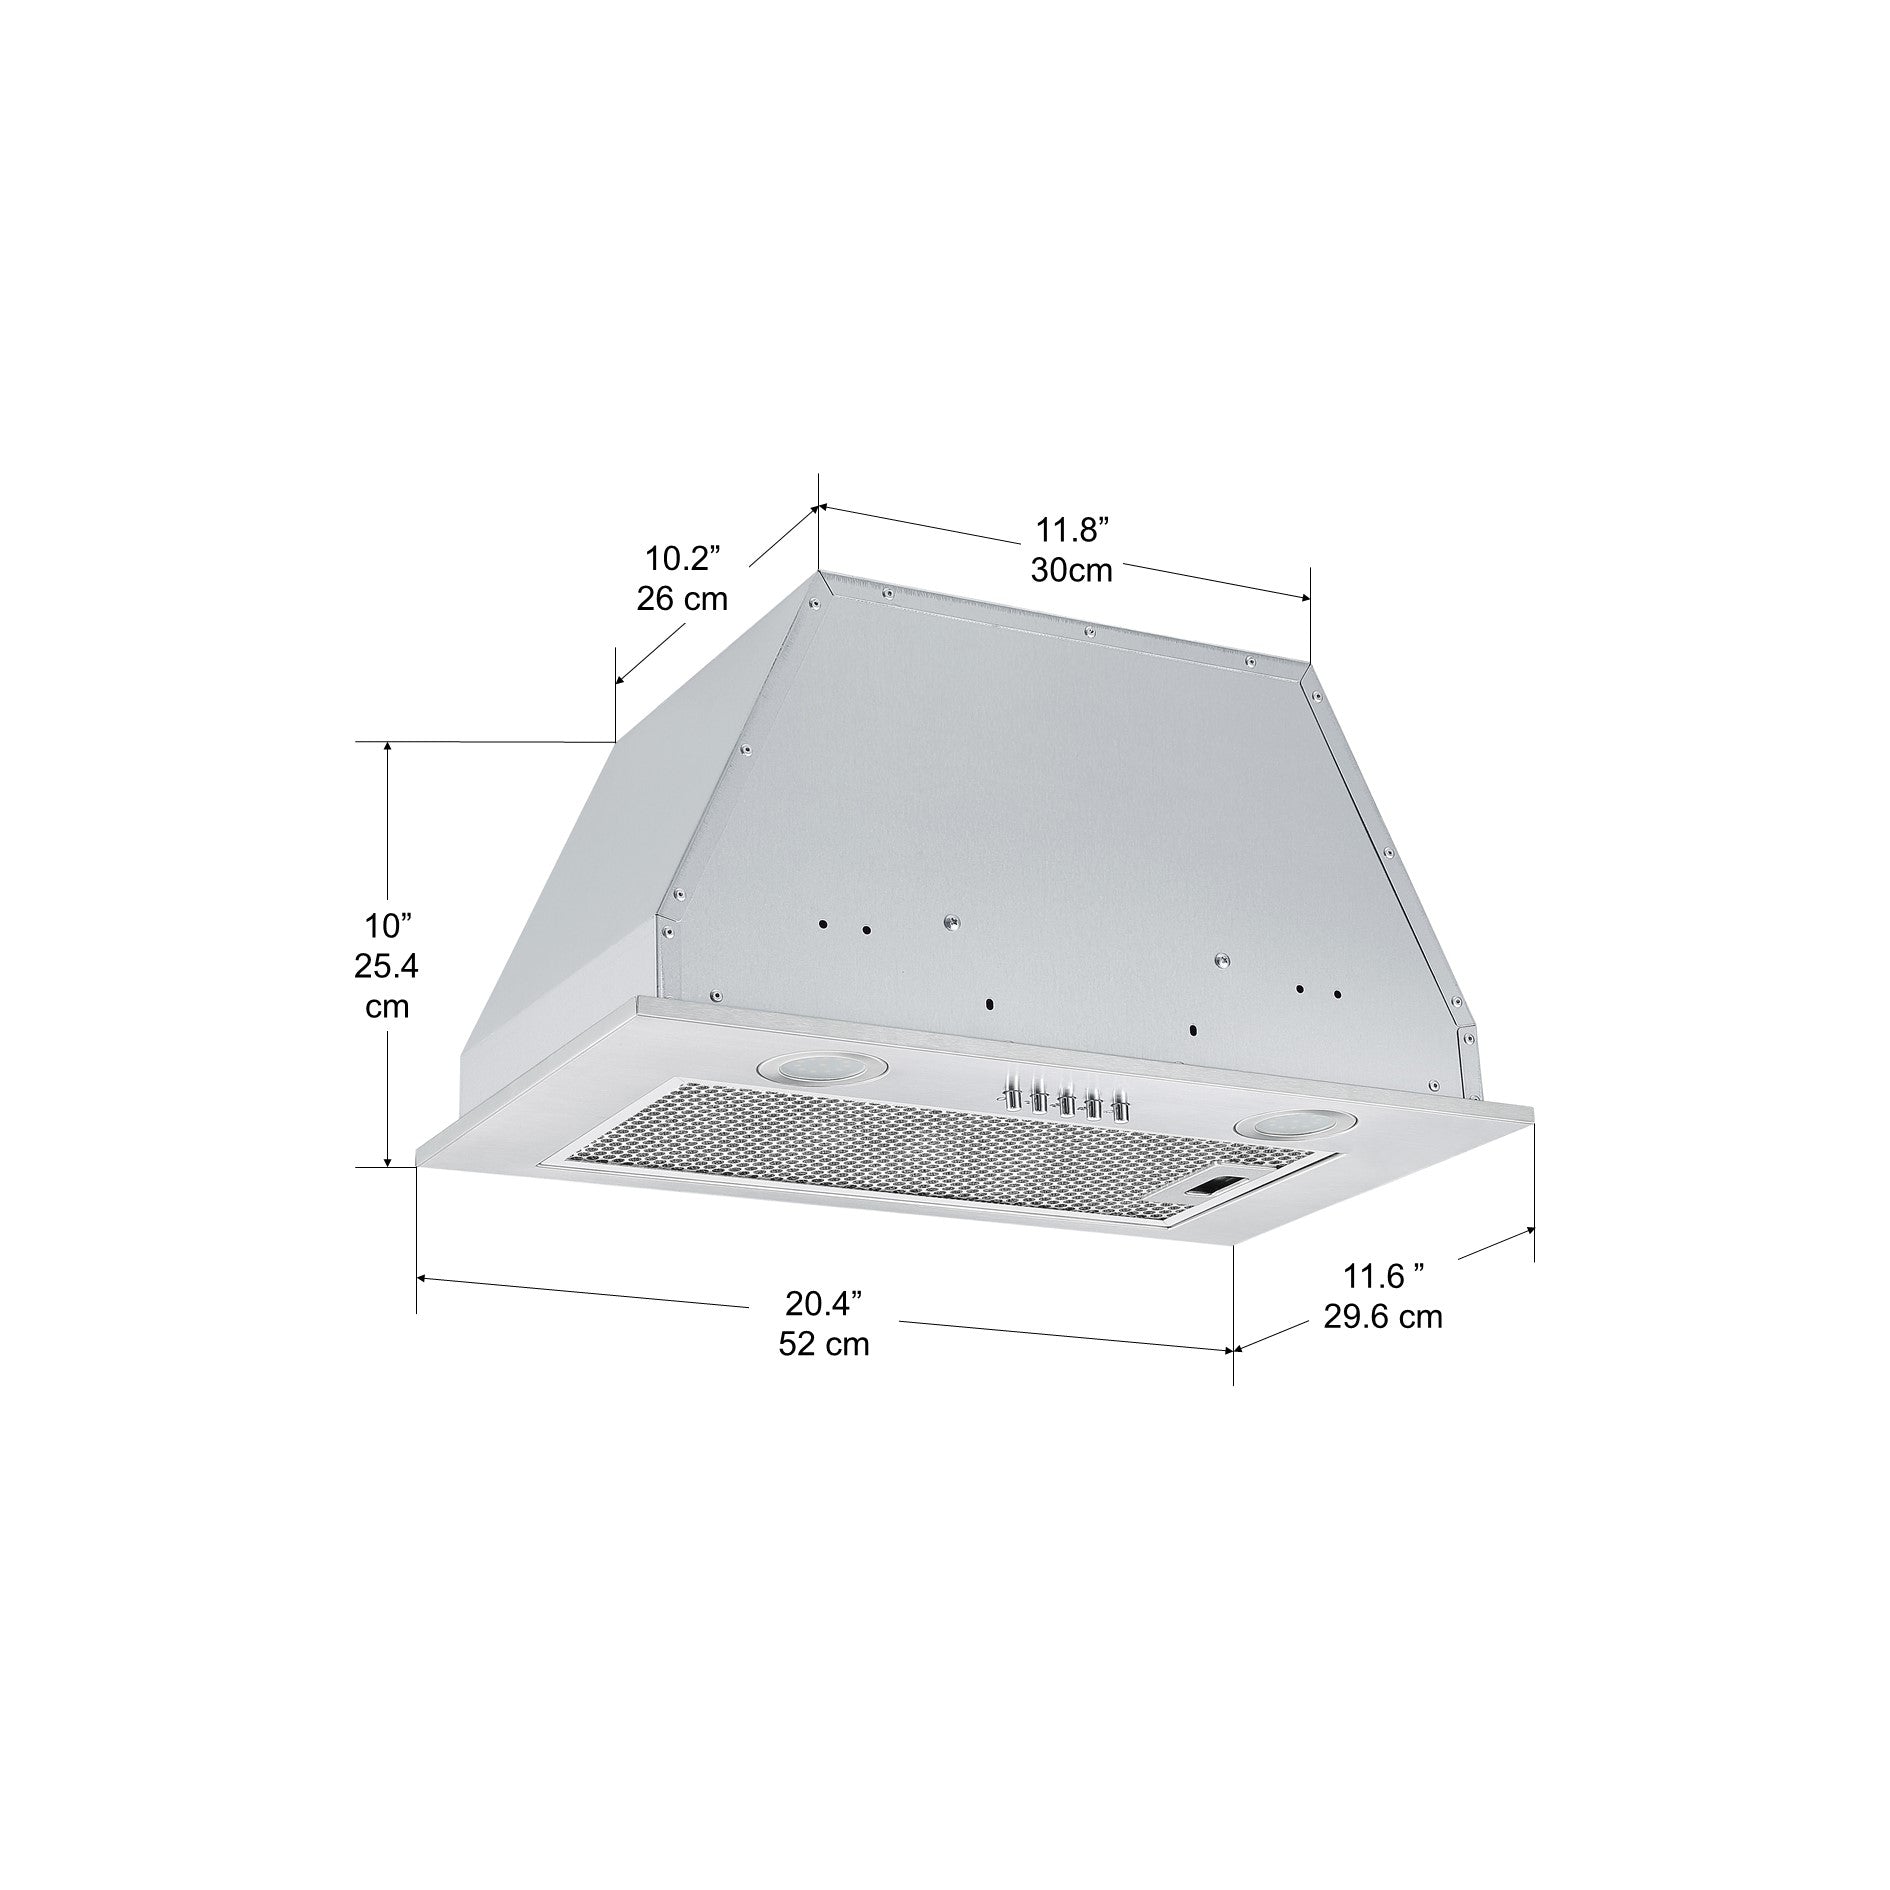 20-in Ducted Stainless Steel Under Cabinet Range Hood Insert